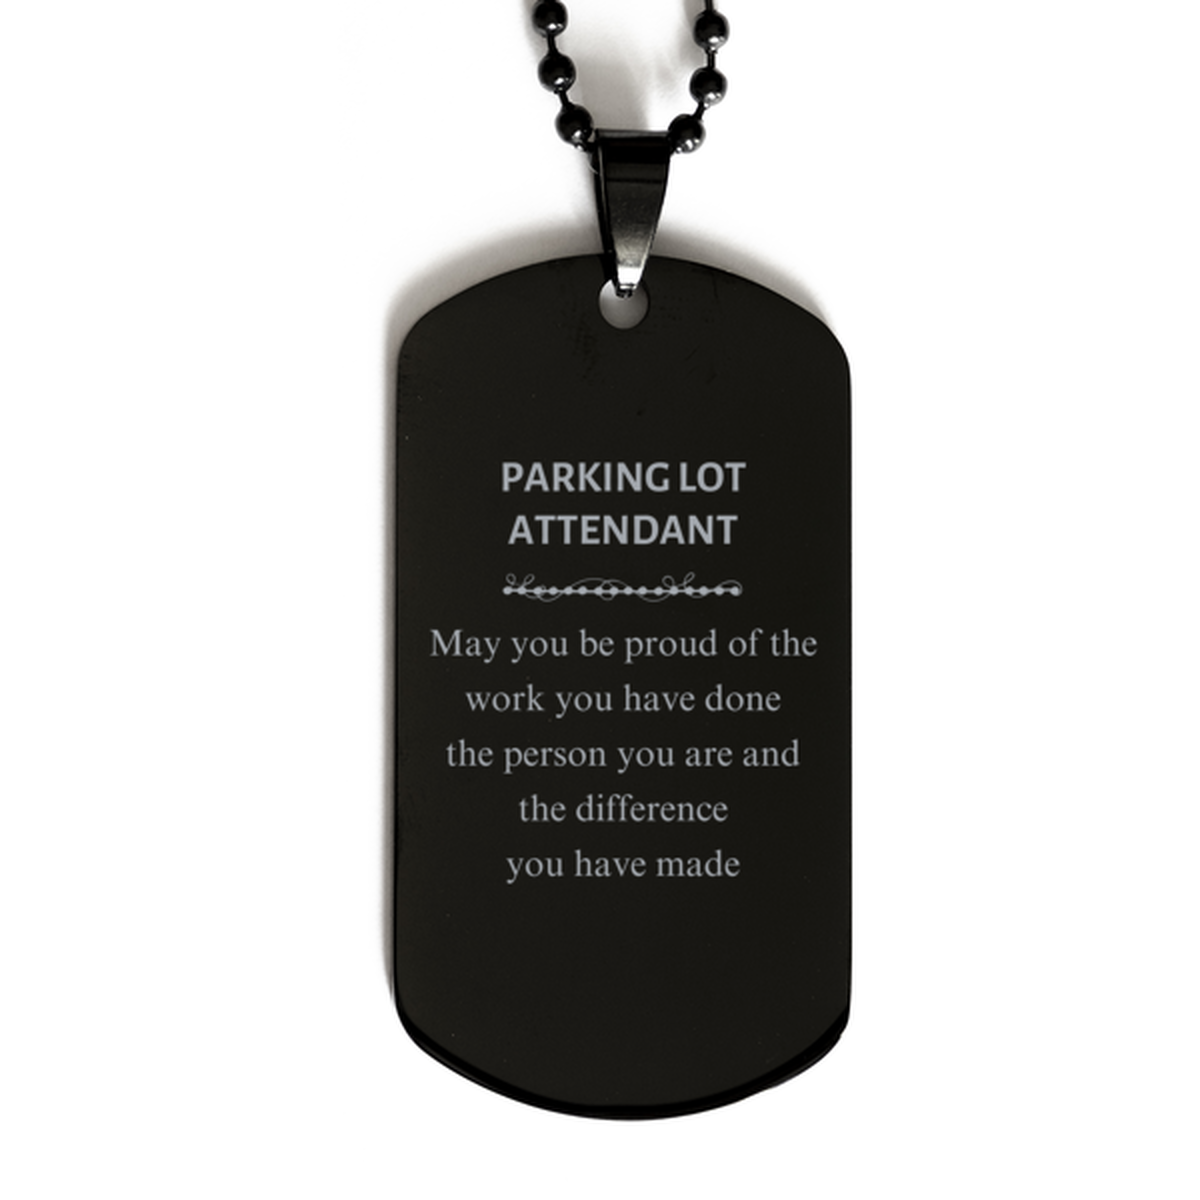 Parking Lot Attendant May you be proud of the work you have done, Retirement Parking Lot Attendant Black Dog Tag for Colleague Appreciation Gifts Amazing for Parking Lot Attendant